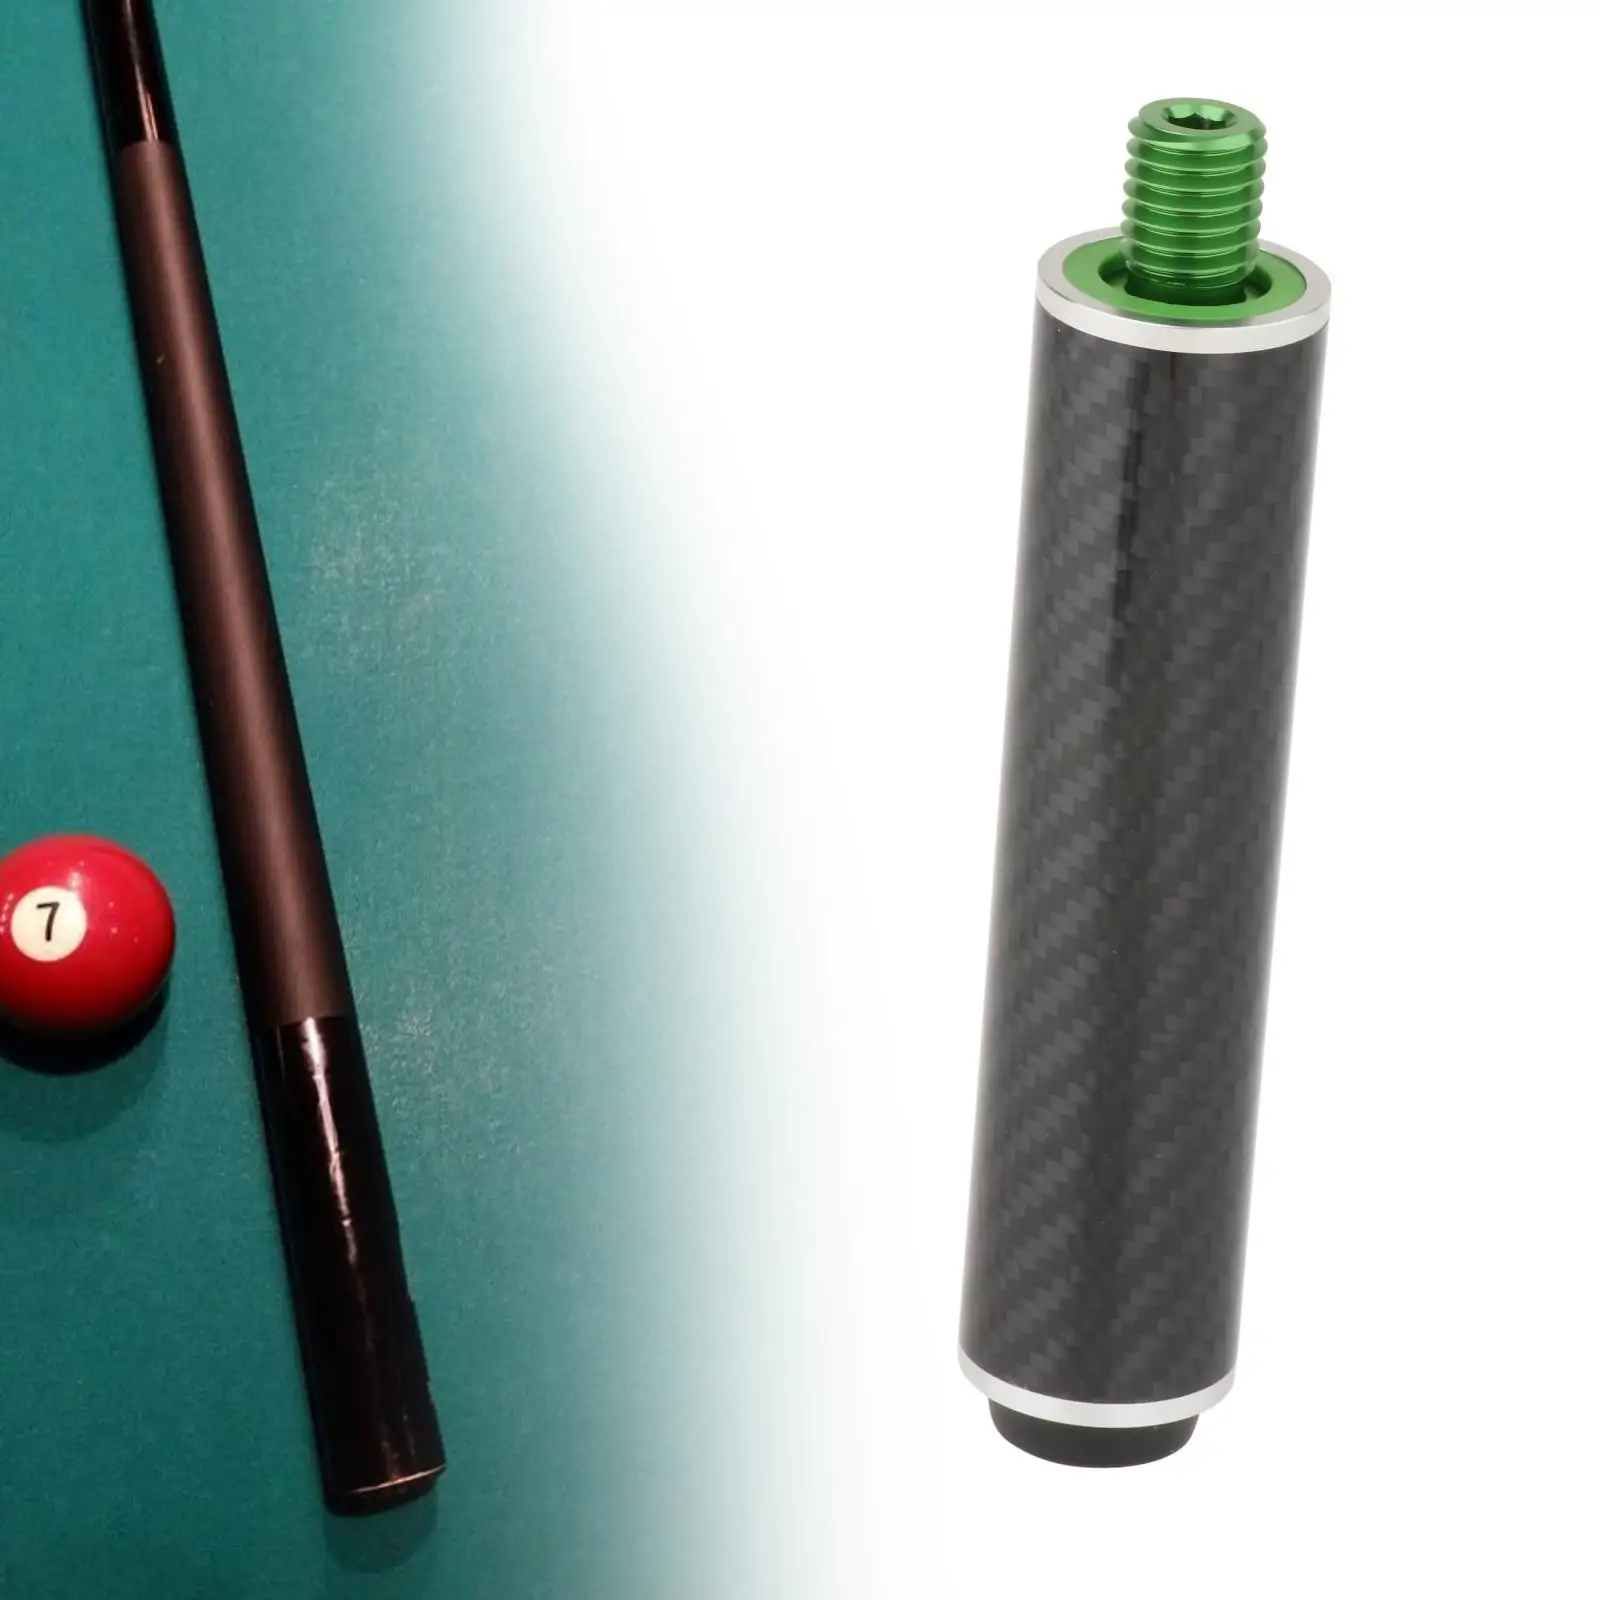 Billiards Pool Cue Extension Dia 3.2cm Portable Snooker Cue Stick Extender, Billiard Connect Shaft for Lovers Billiard Cues